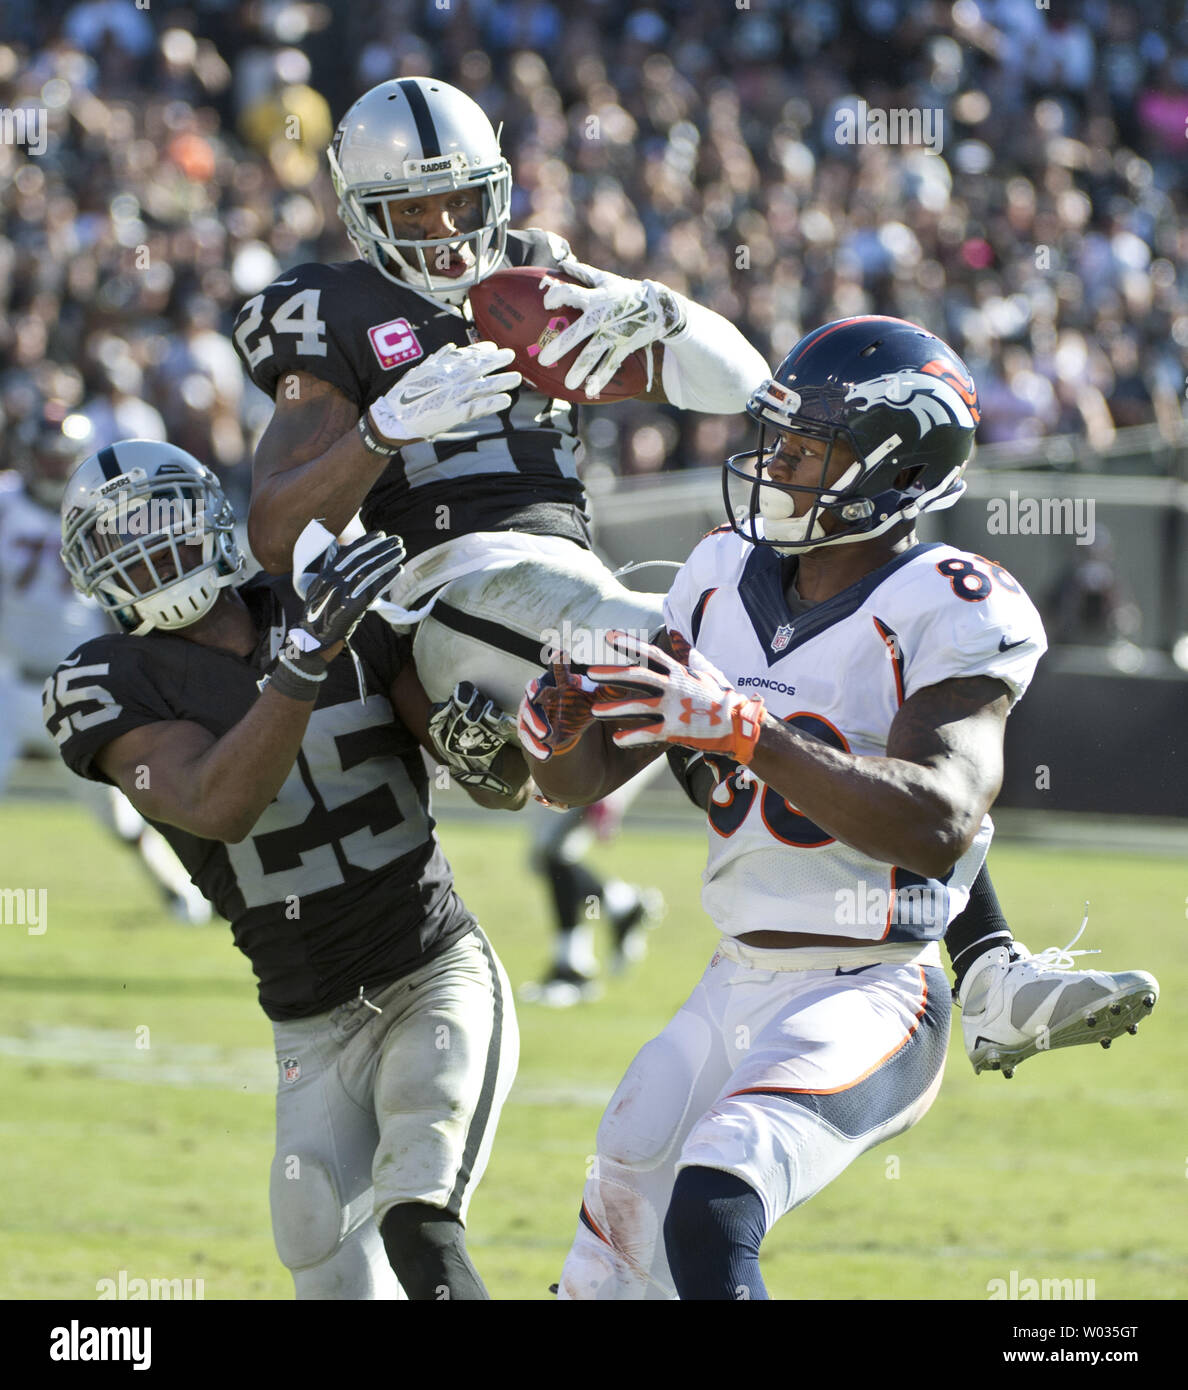 Oakland Raiders Charles Woodson (24) goes high to intercept a Denver Broncos Peyton Manning pass intended for Demaryius Thomas in the third quarter at O.co Coliseum in Oakland, California on October 11, 2015. The Broncos defeated the Raiders 16-10. Photo by Terry Schmitt/UPI Stock Photo